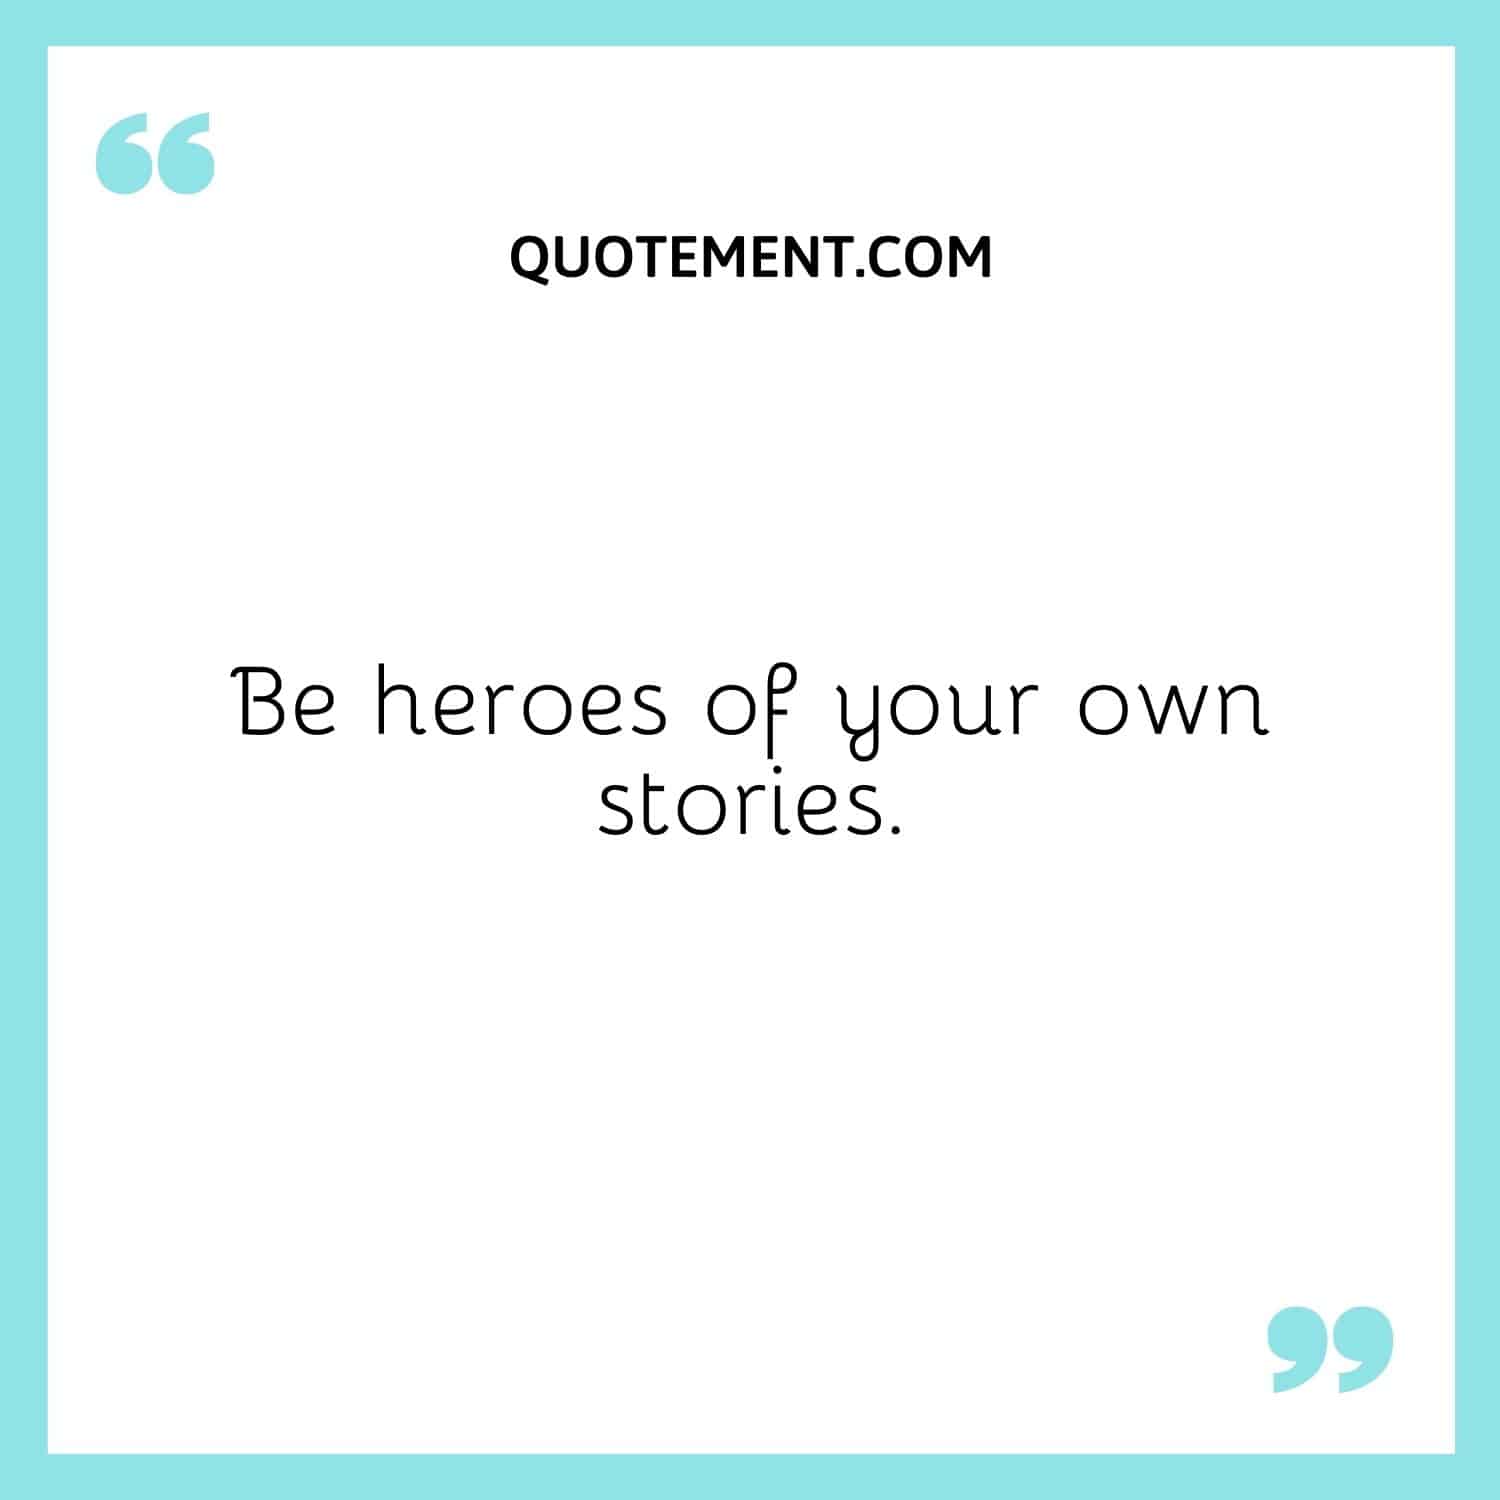 Be heroes of your own stories.